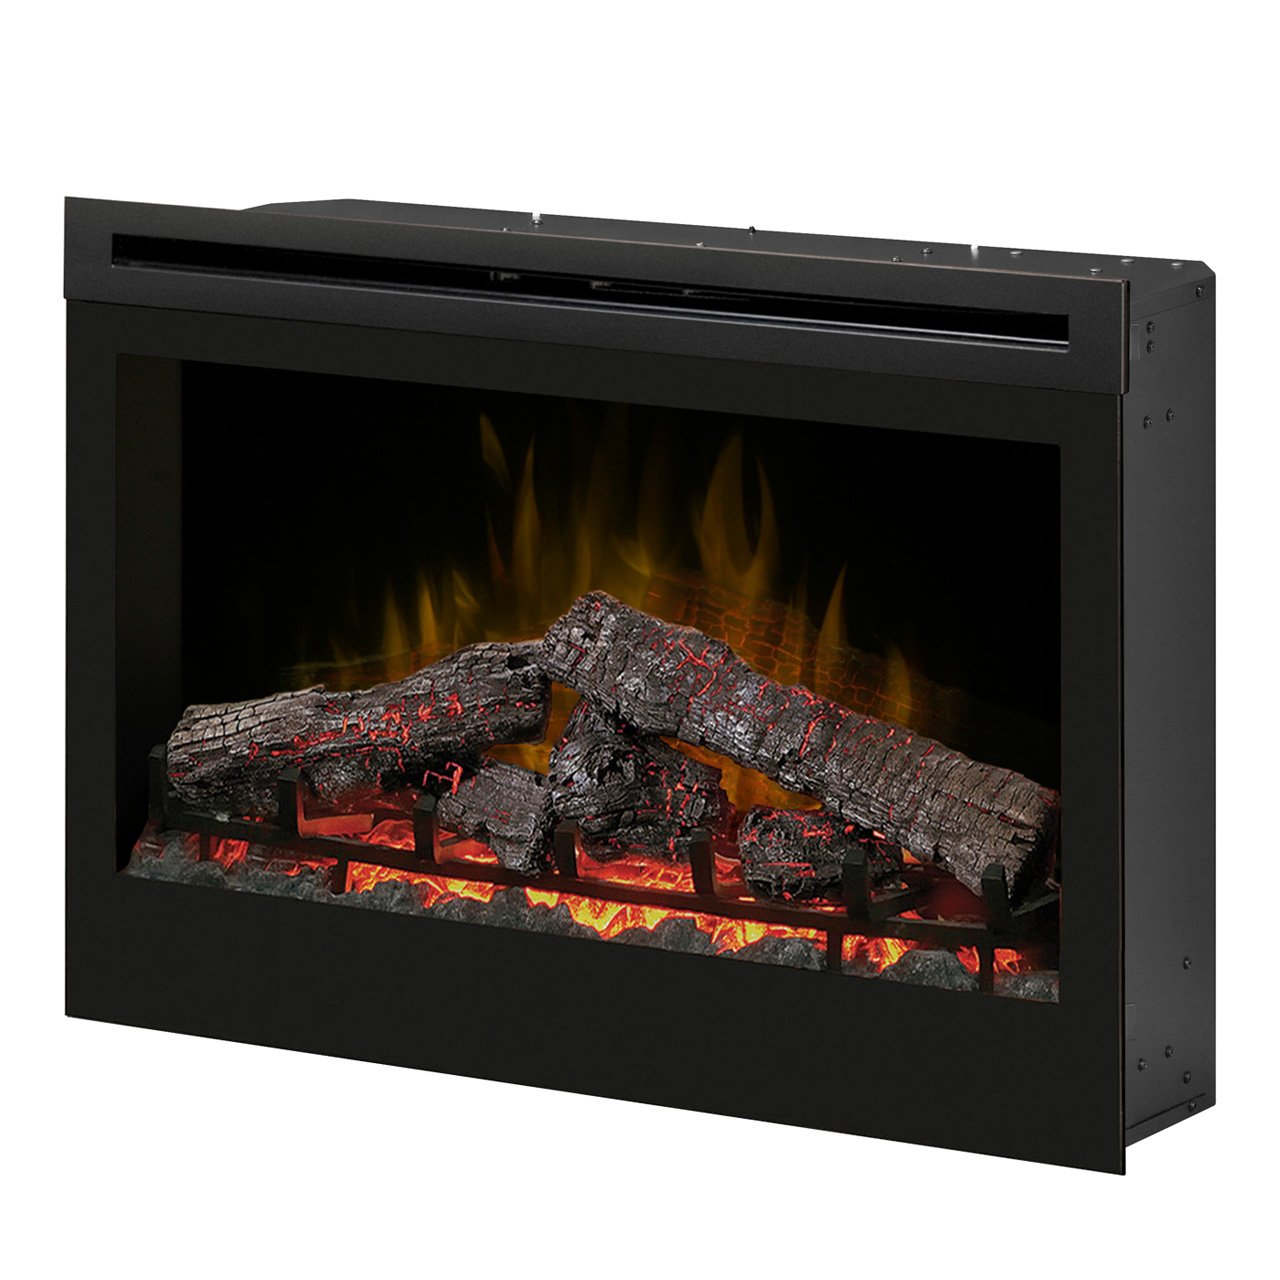 Fireplace World Elegant Dimplex Df3033st 33 Inch Self Trimming Electric Fireplace Insert